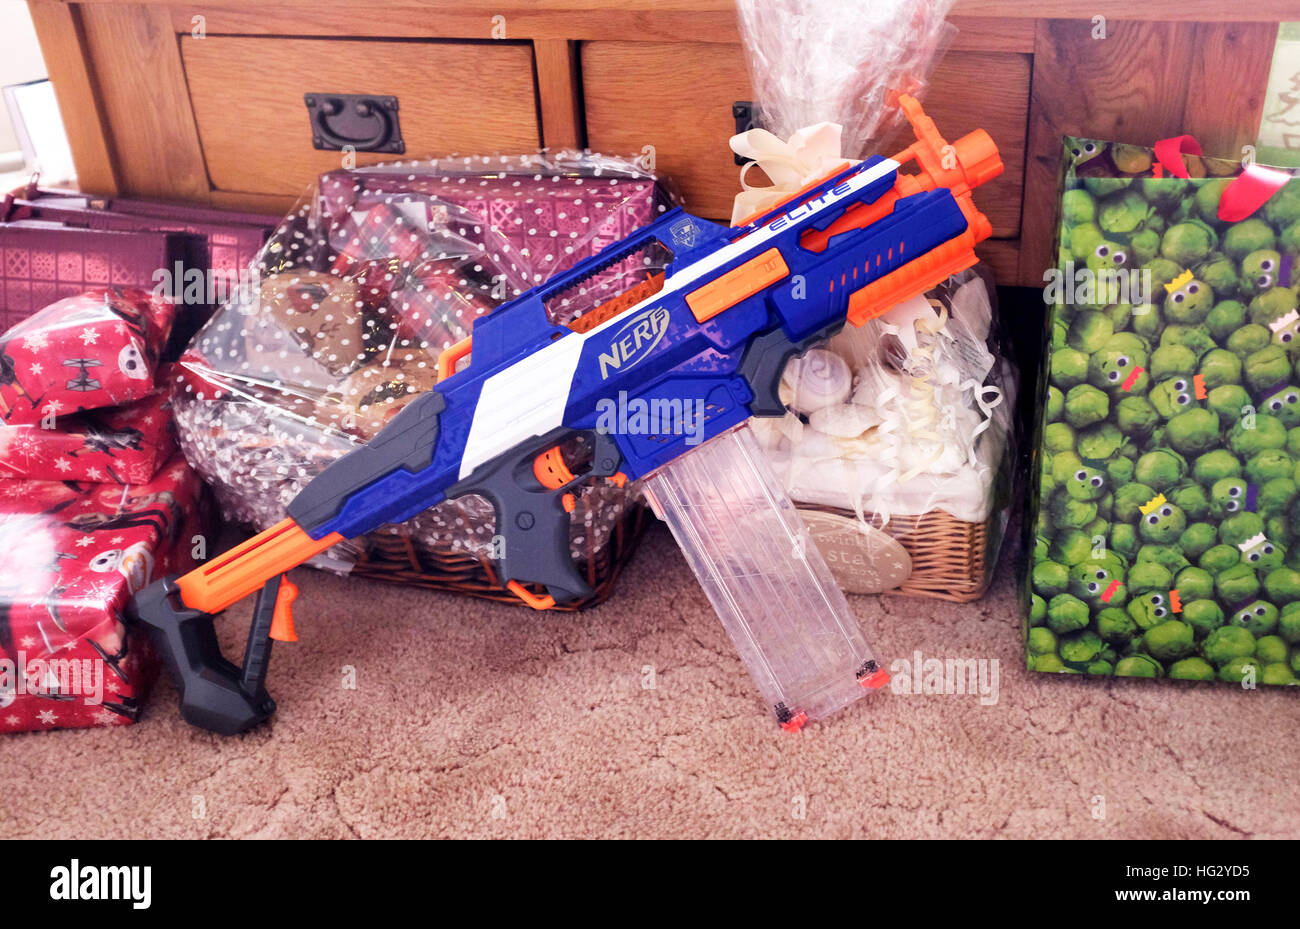 A Nerf gun one of the most popular toys for Christmas 2016 in the UK Stock Photo